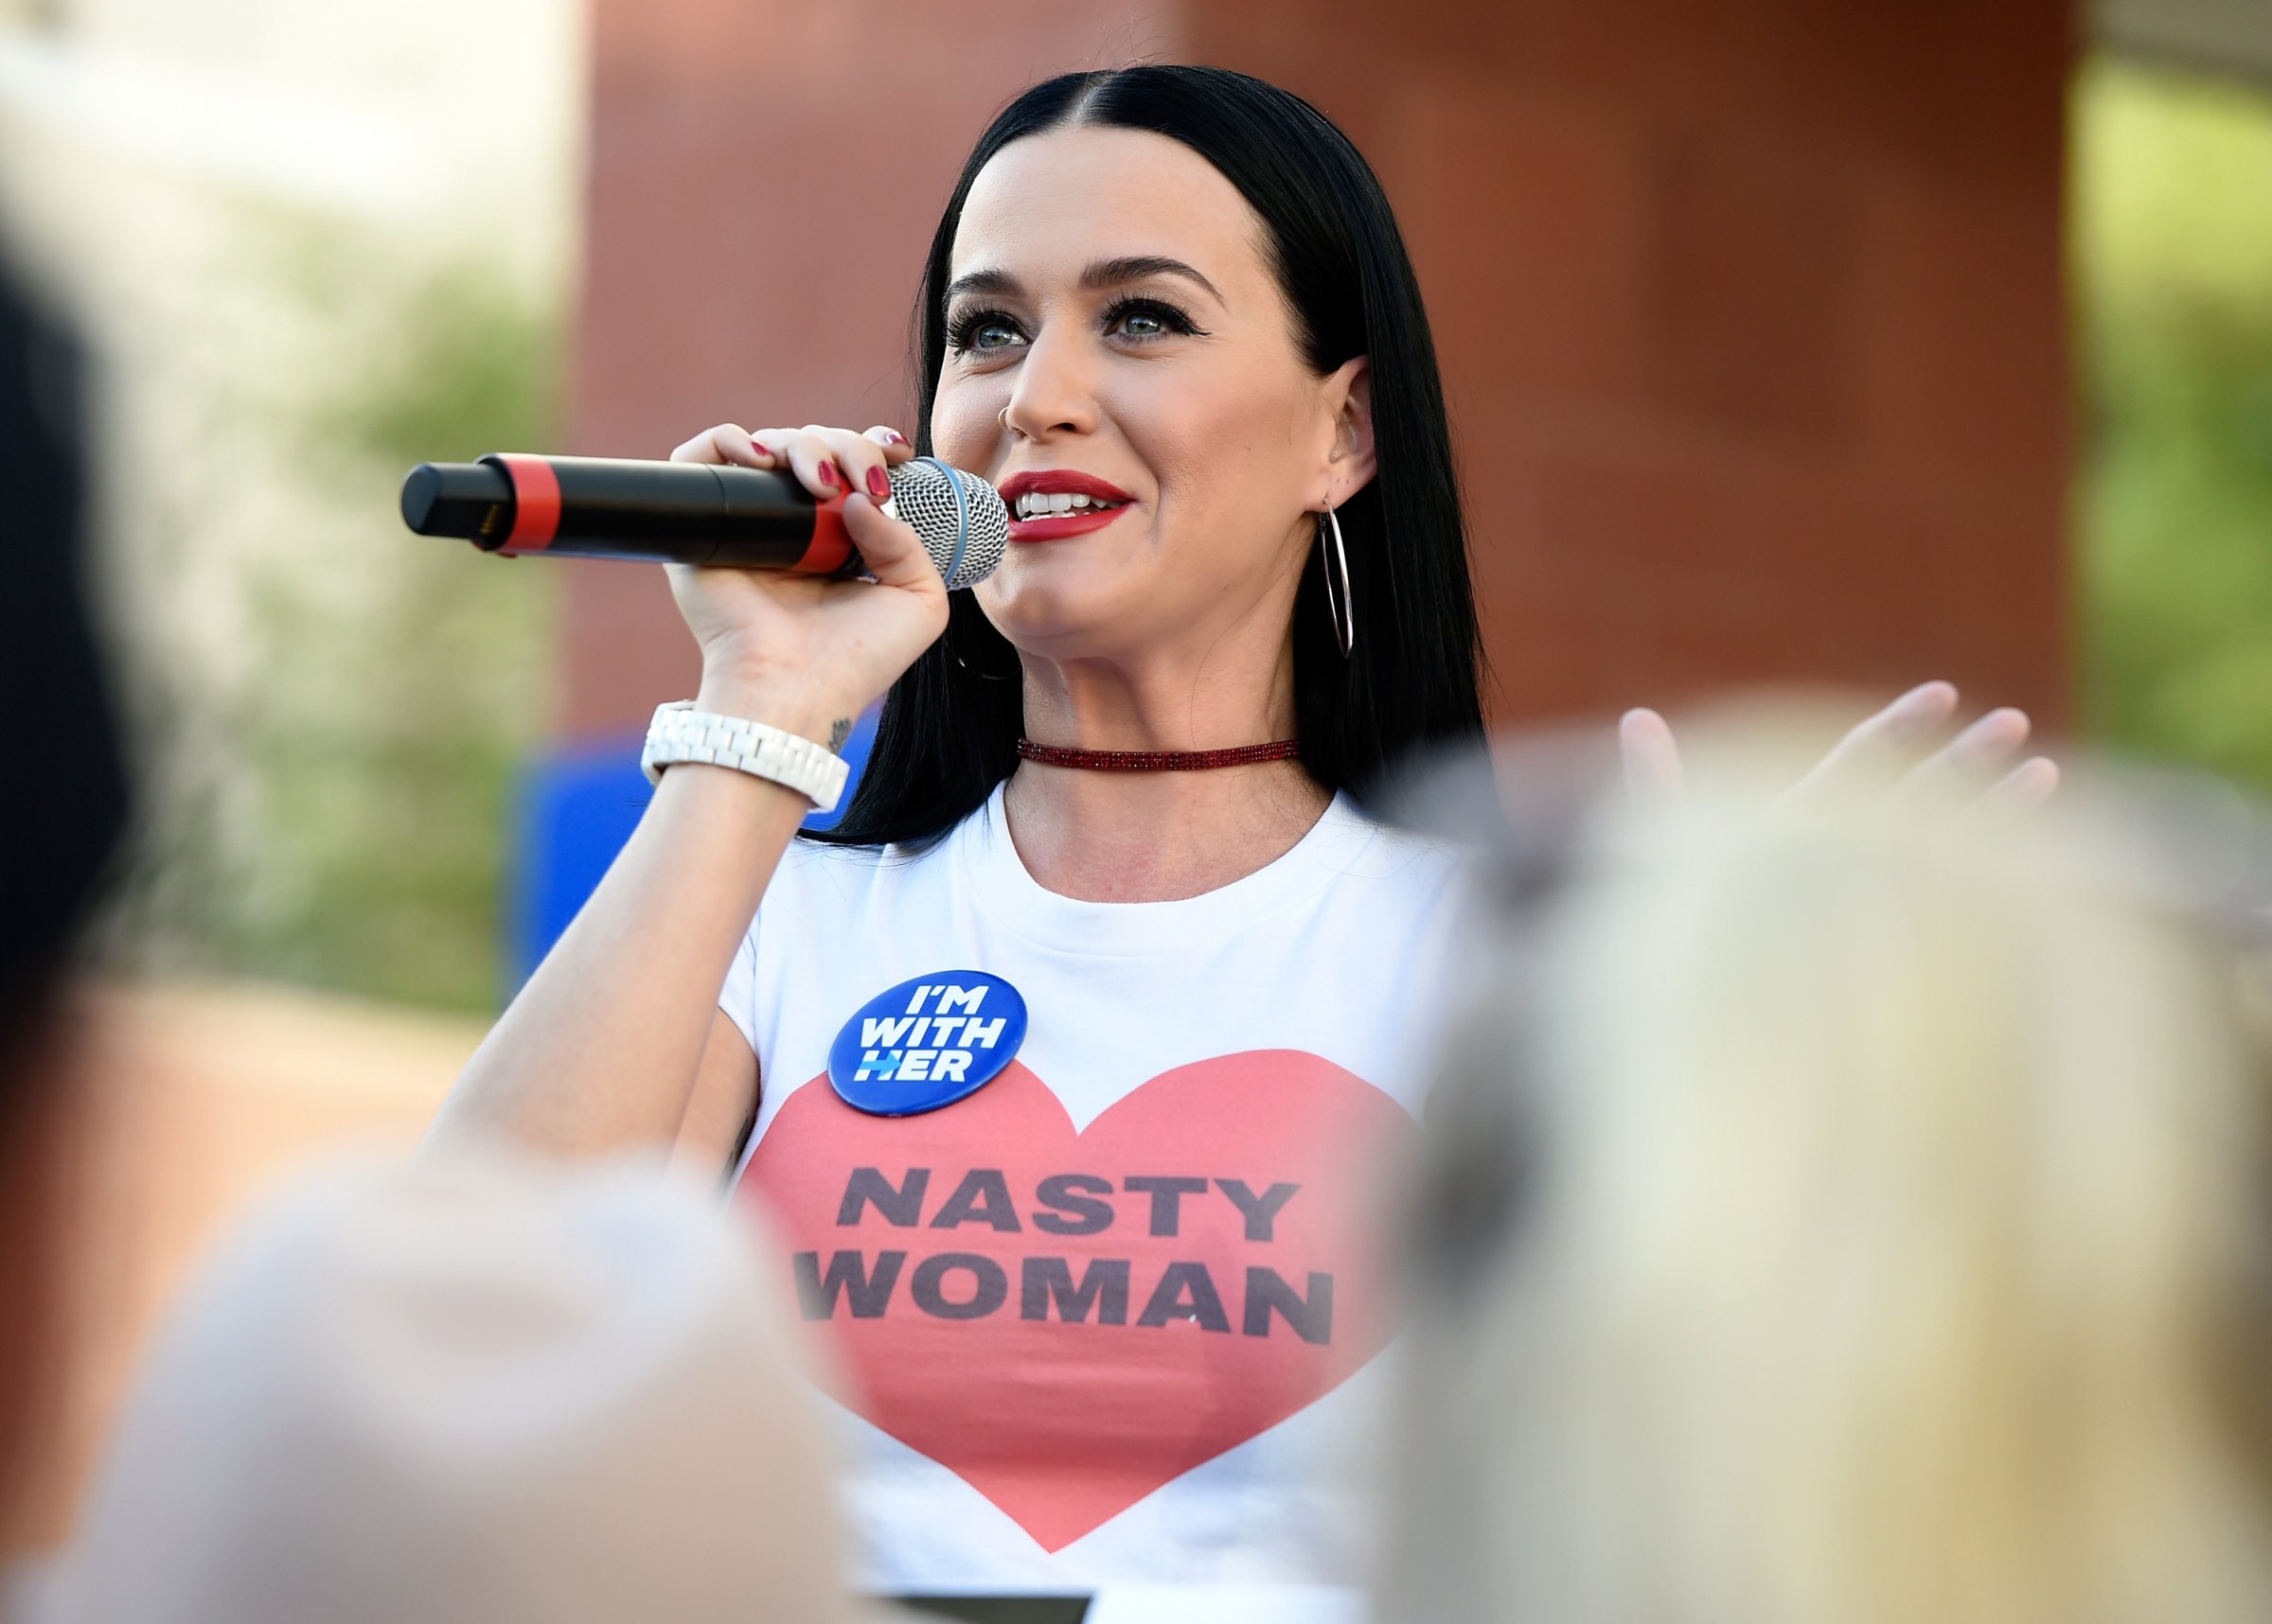 Singer Katy Perry speaks during a get out the early vote rally as she campaigns for Democratic presidential candidate Hillary Clinton at UNLV on October 22, 2016 in Las Vegas, Nevada. Today is the first day for early voting in Nevada ahead of the November 8 general election.